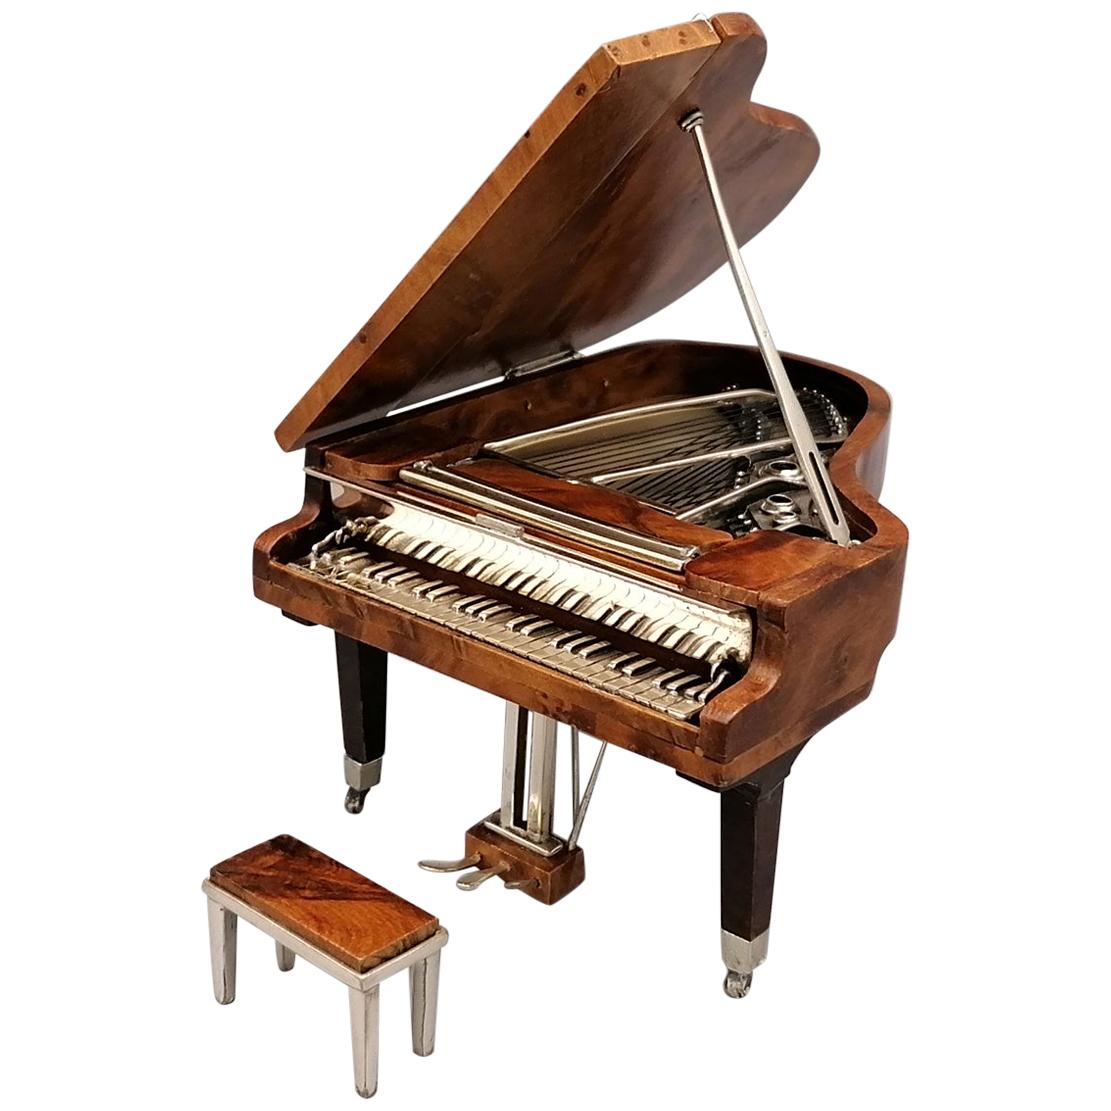 20th Century Italian Miniature Rosewood Grand Piano with Sterling Silver Details